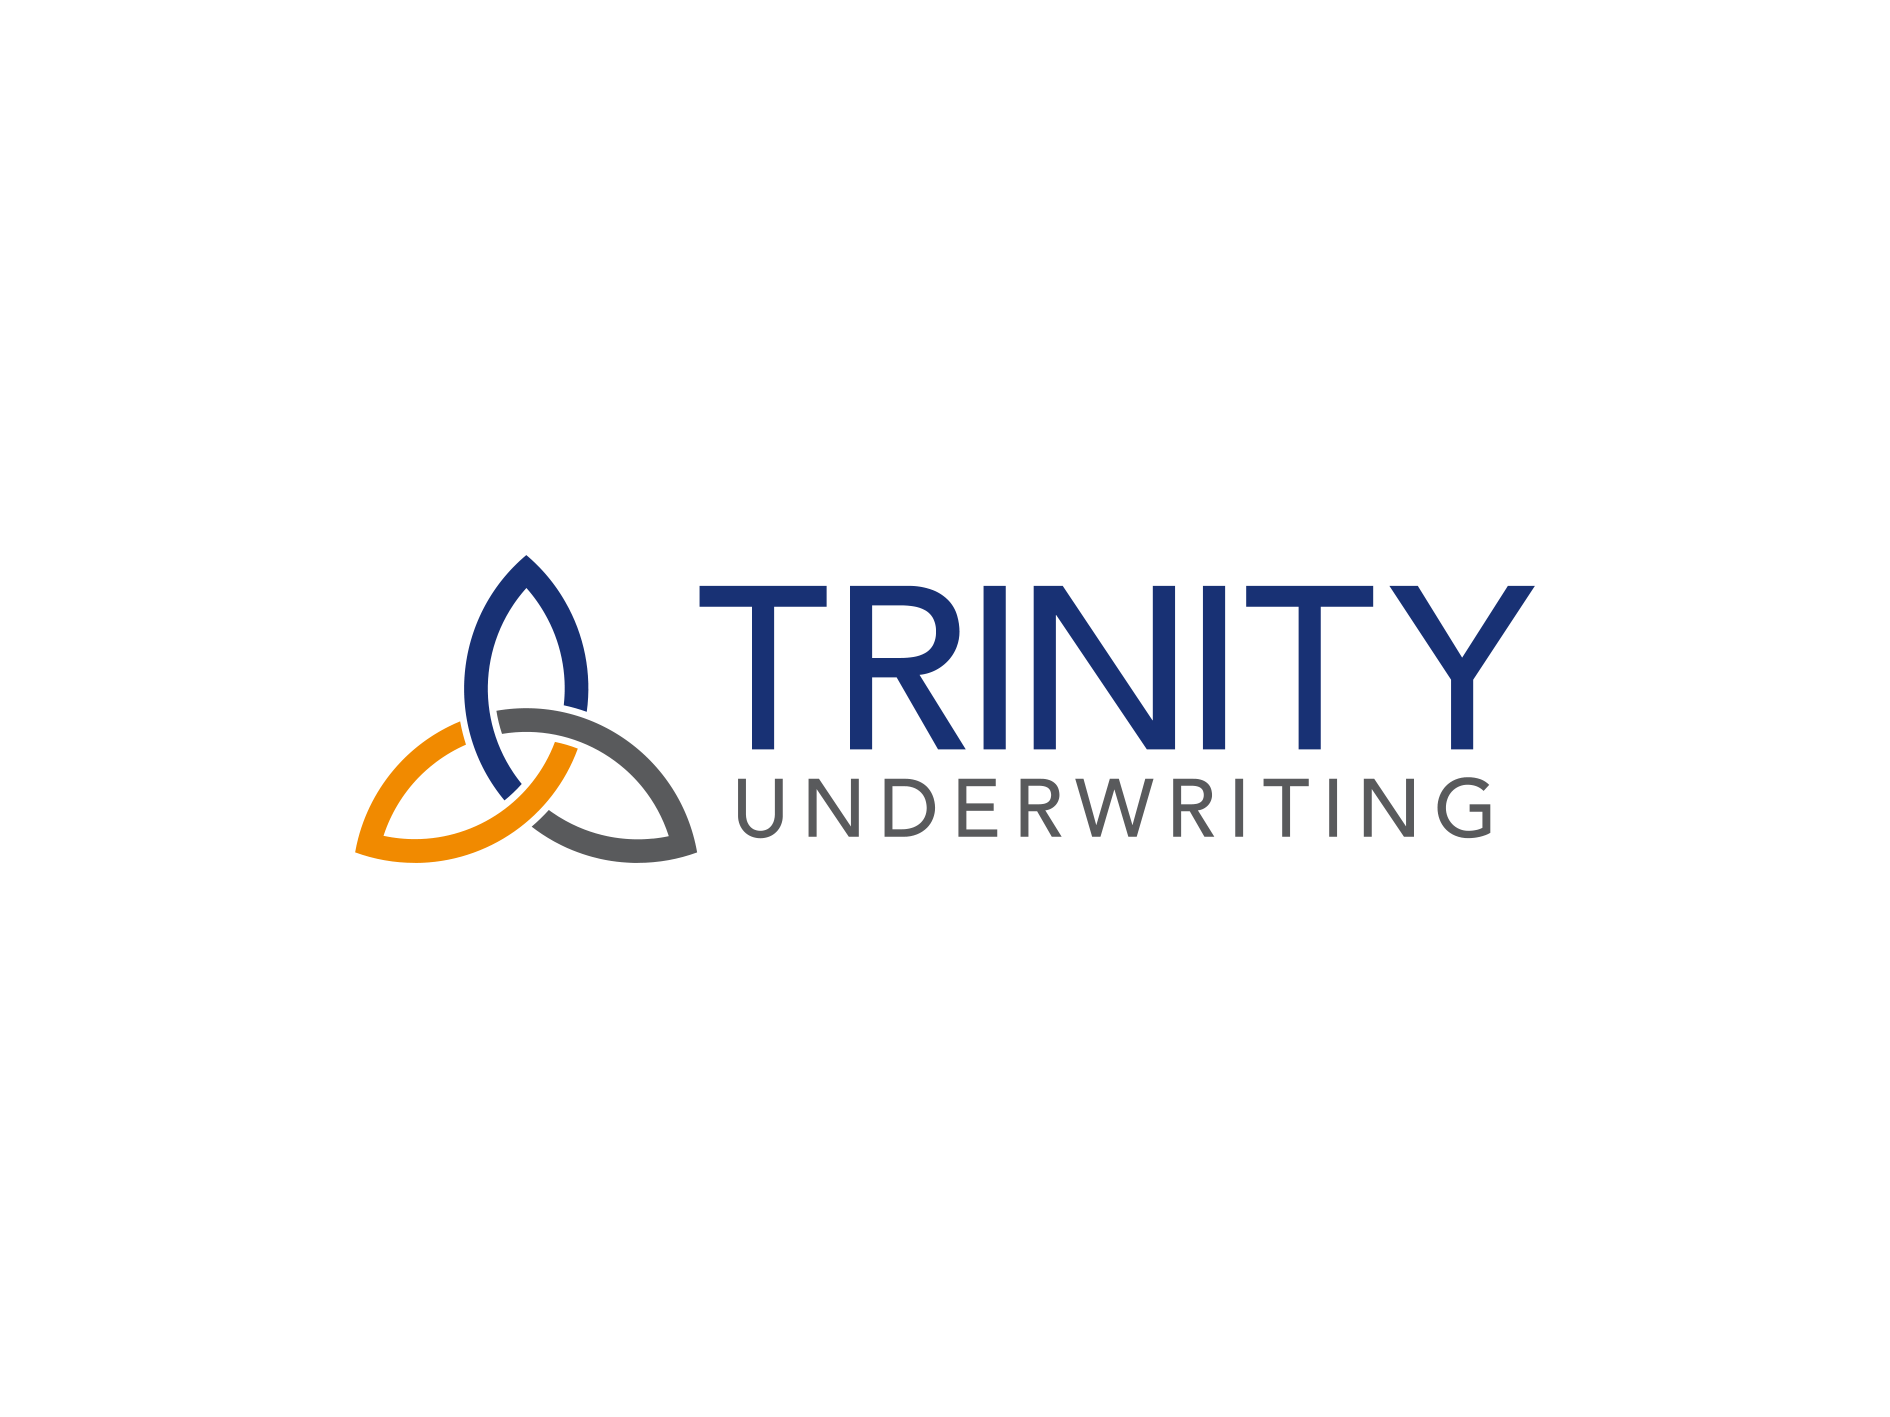 Trinity Underwriting Managers